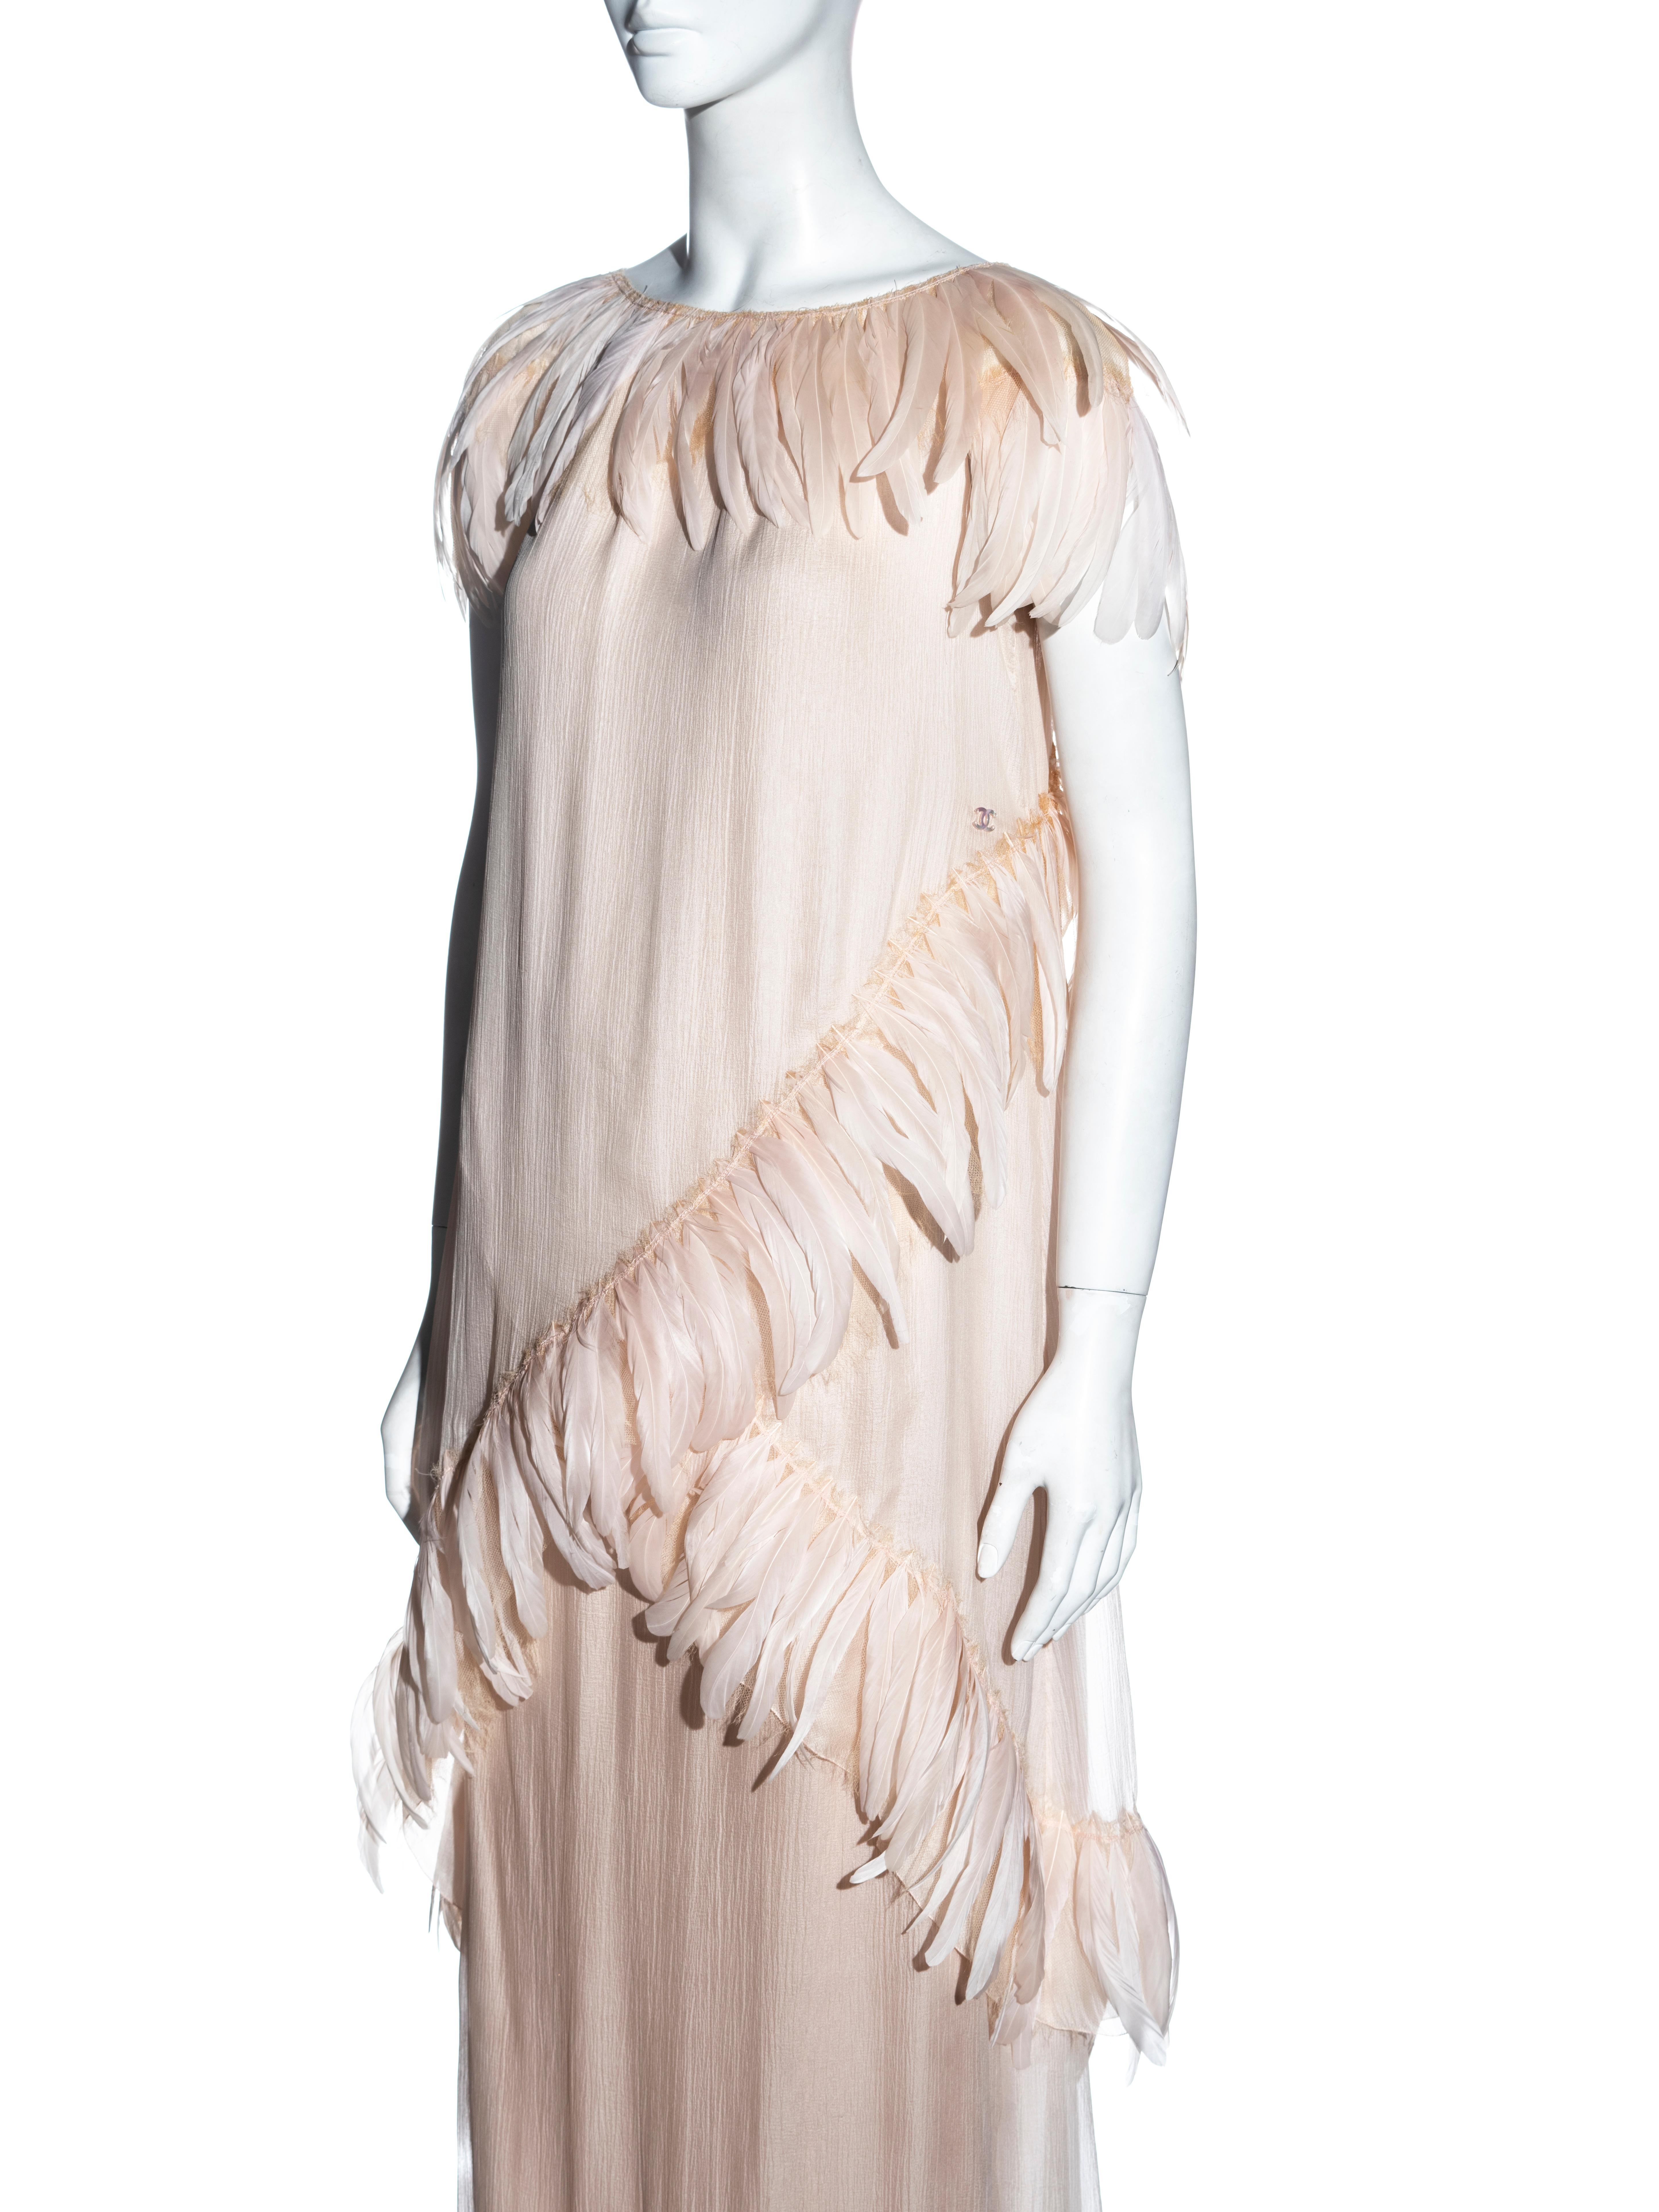 Chanel by Karl Lagerfeld silk chiffon evening dress with feathers, cr 2009 3